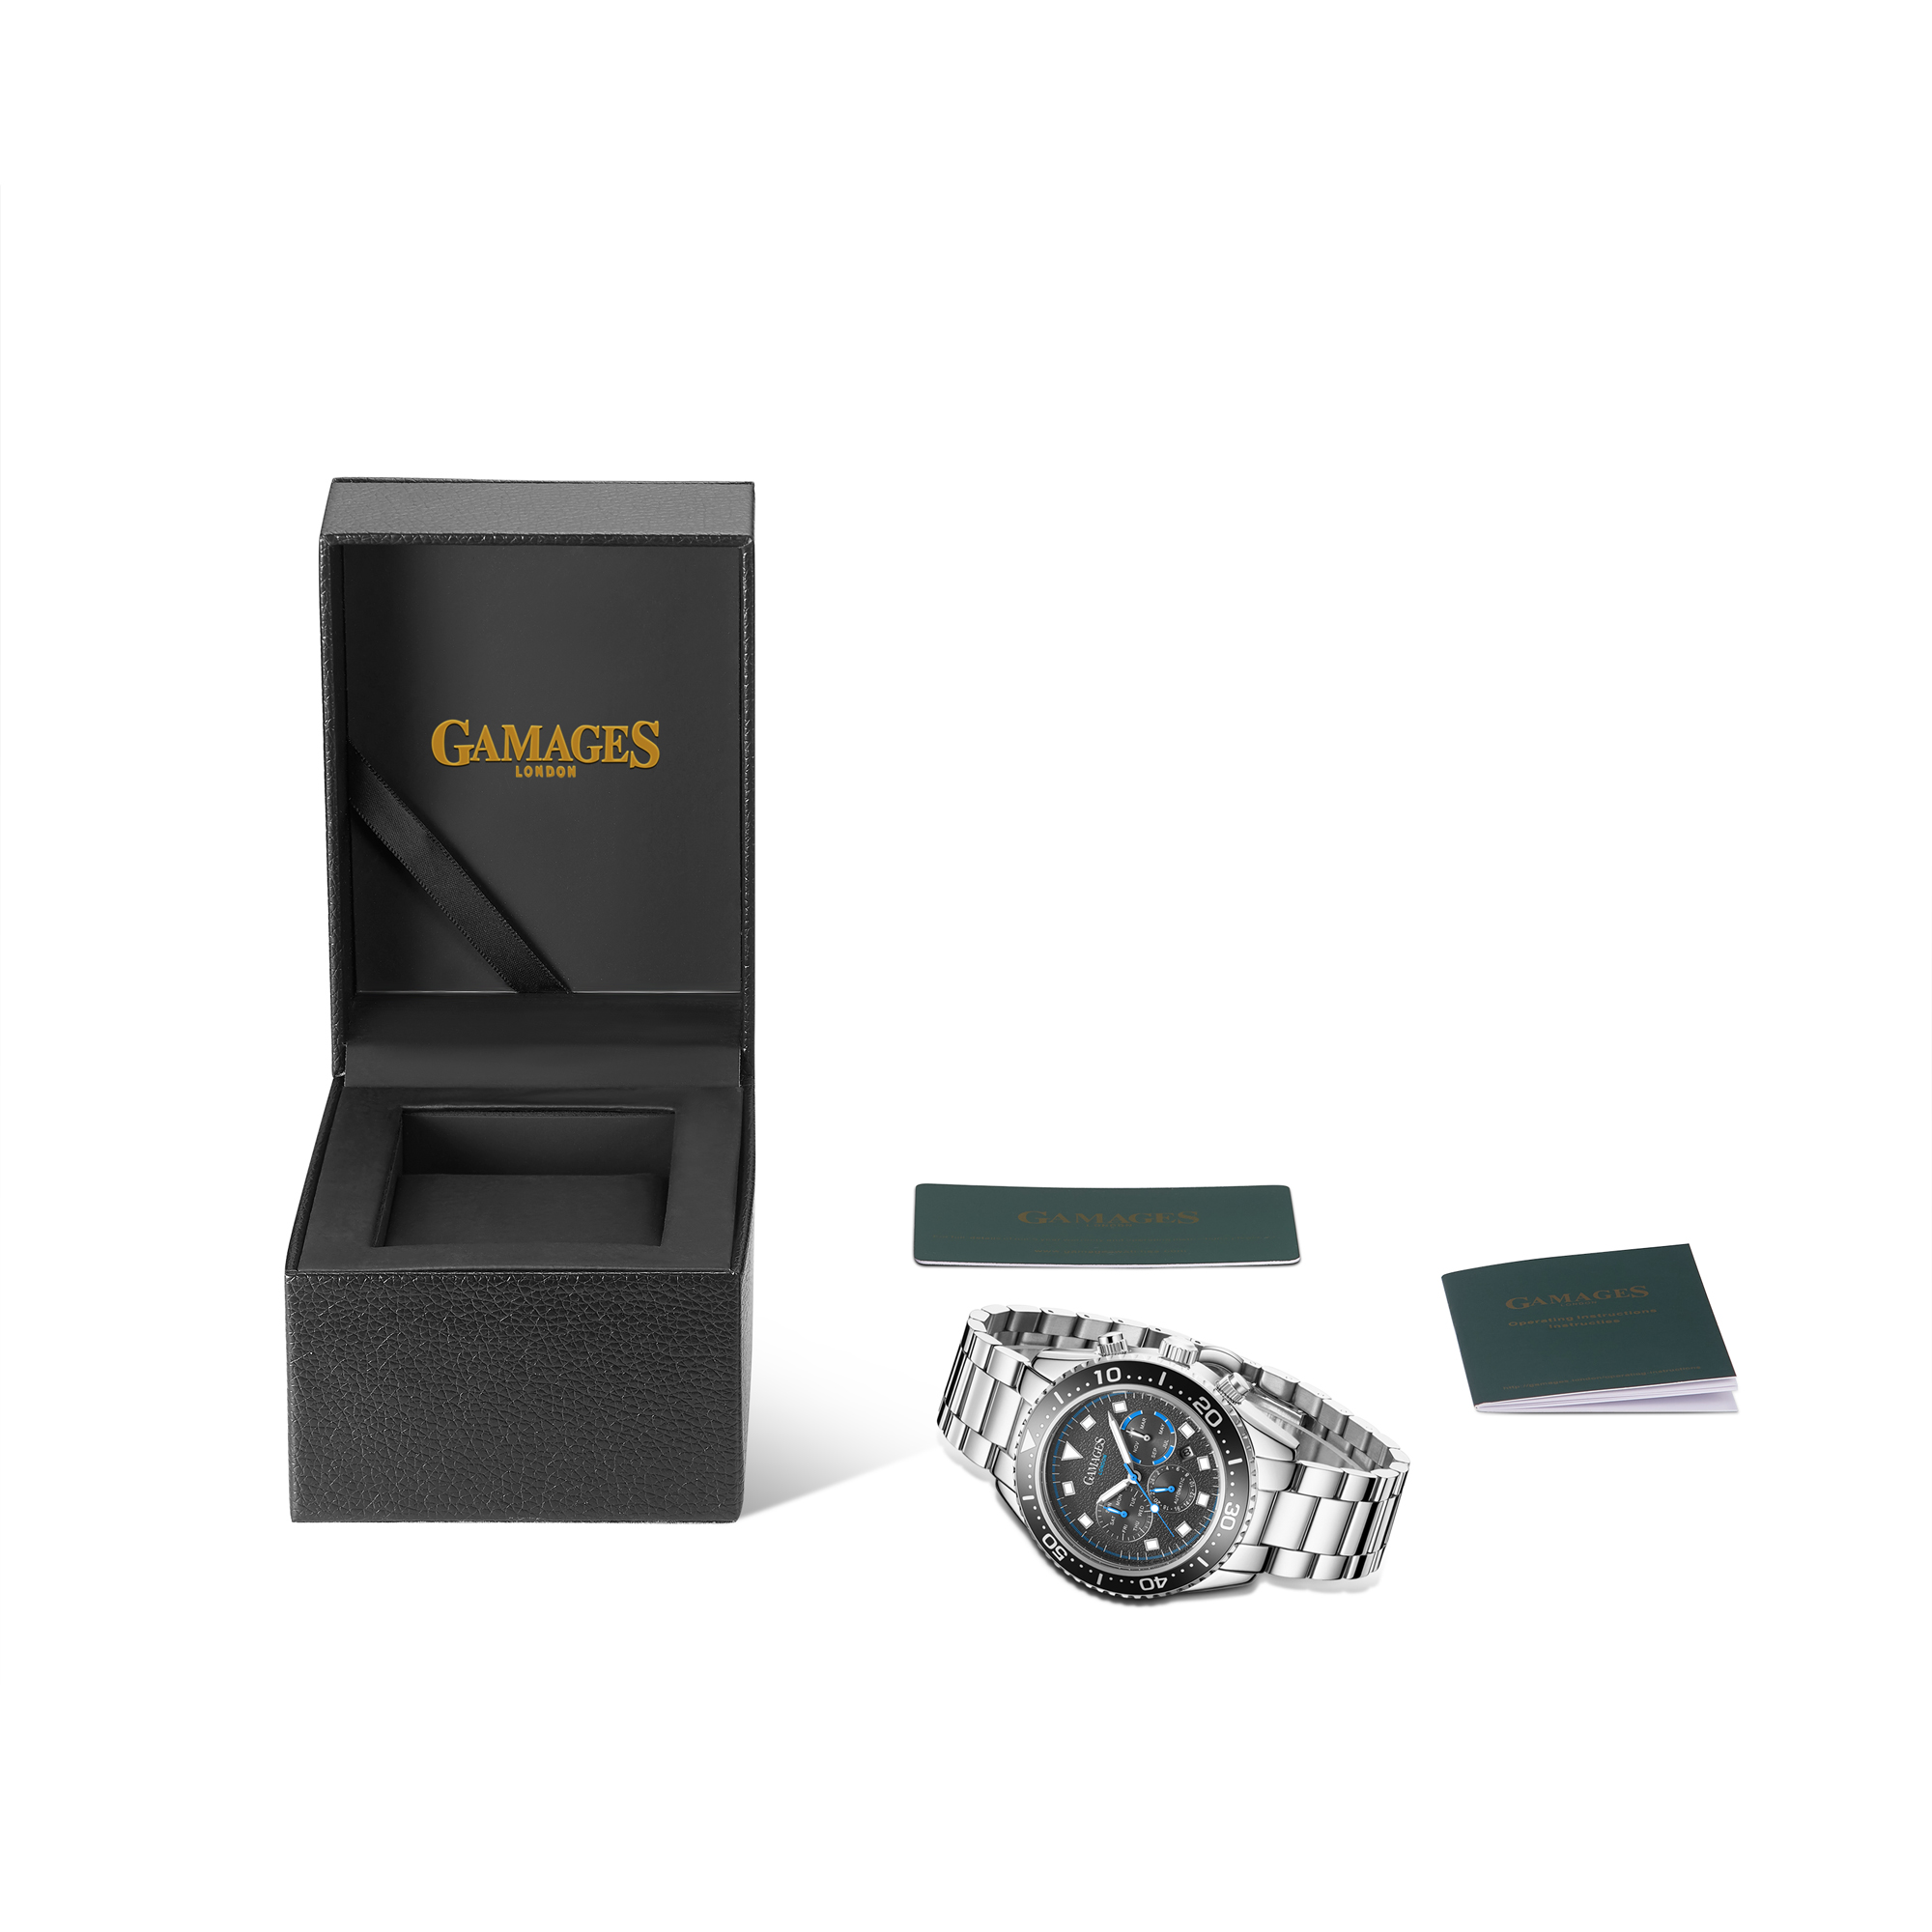 Ltd Edition Hand Assembled Gamages Allure Automatic Steel – 5 Year Warranty & Free Delivery - Image 2 of 4